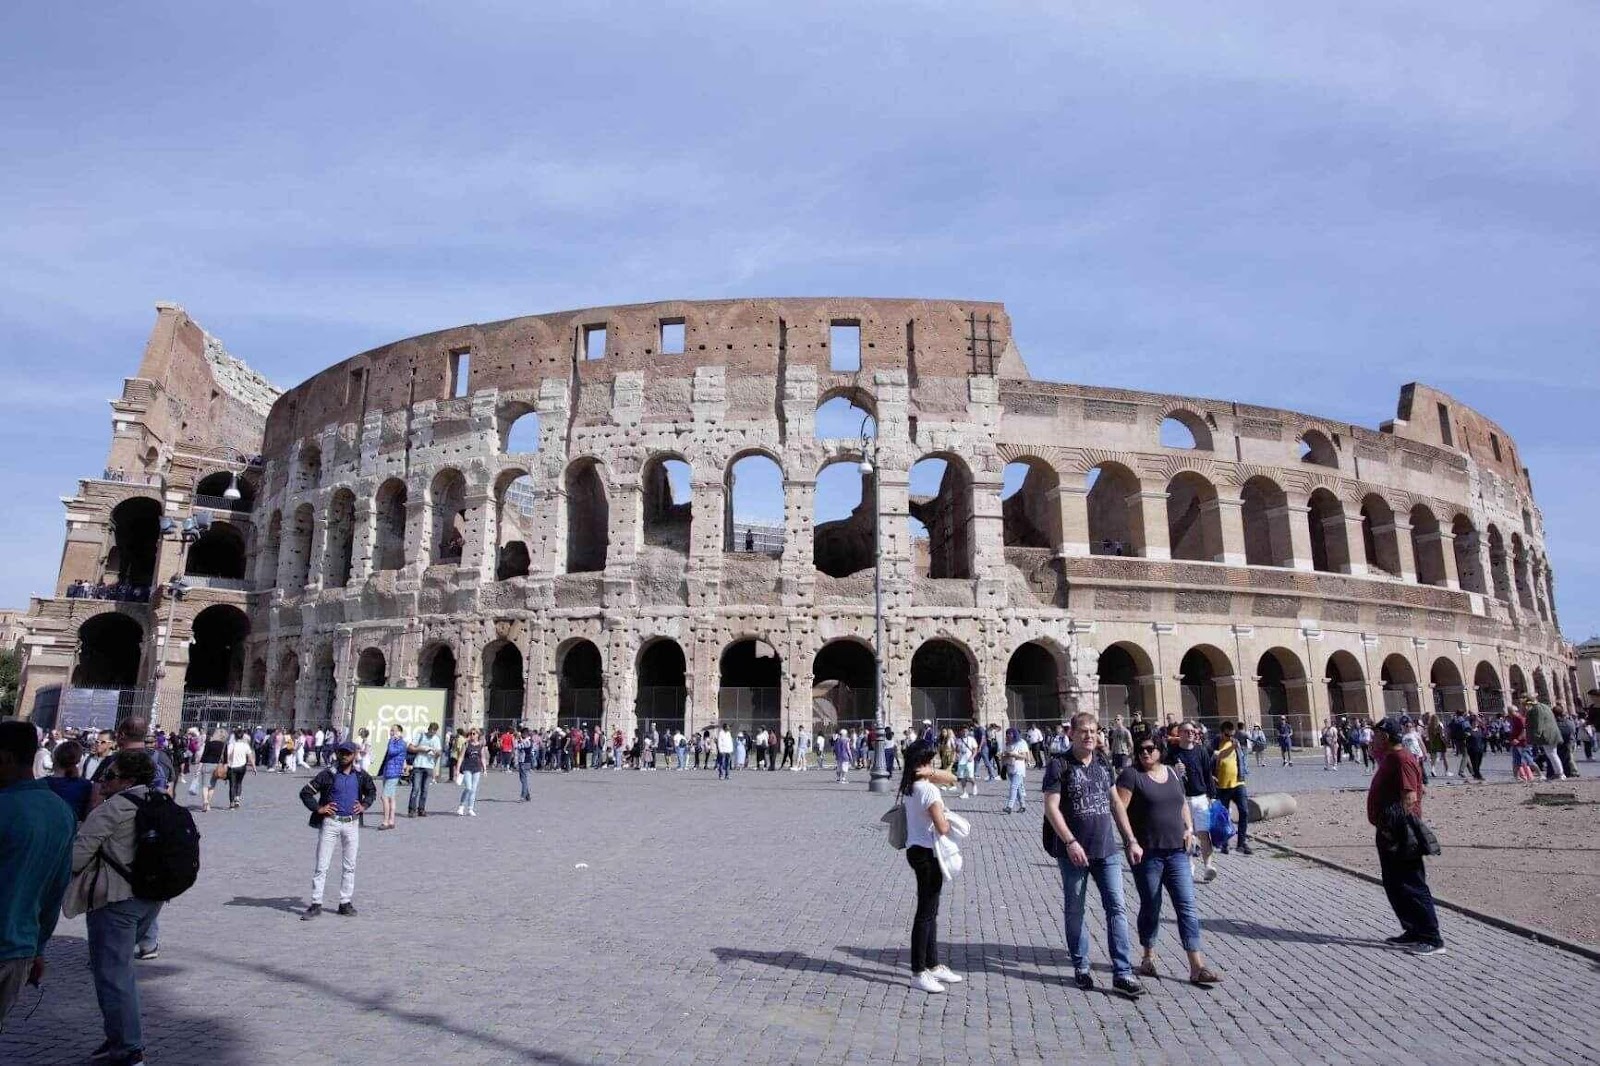 A group of people standing in front of a large stone building with Colosseum in the background